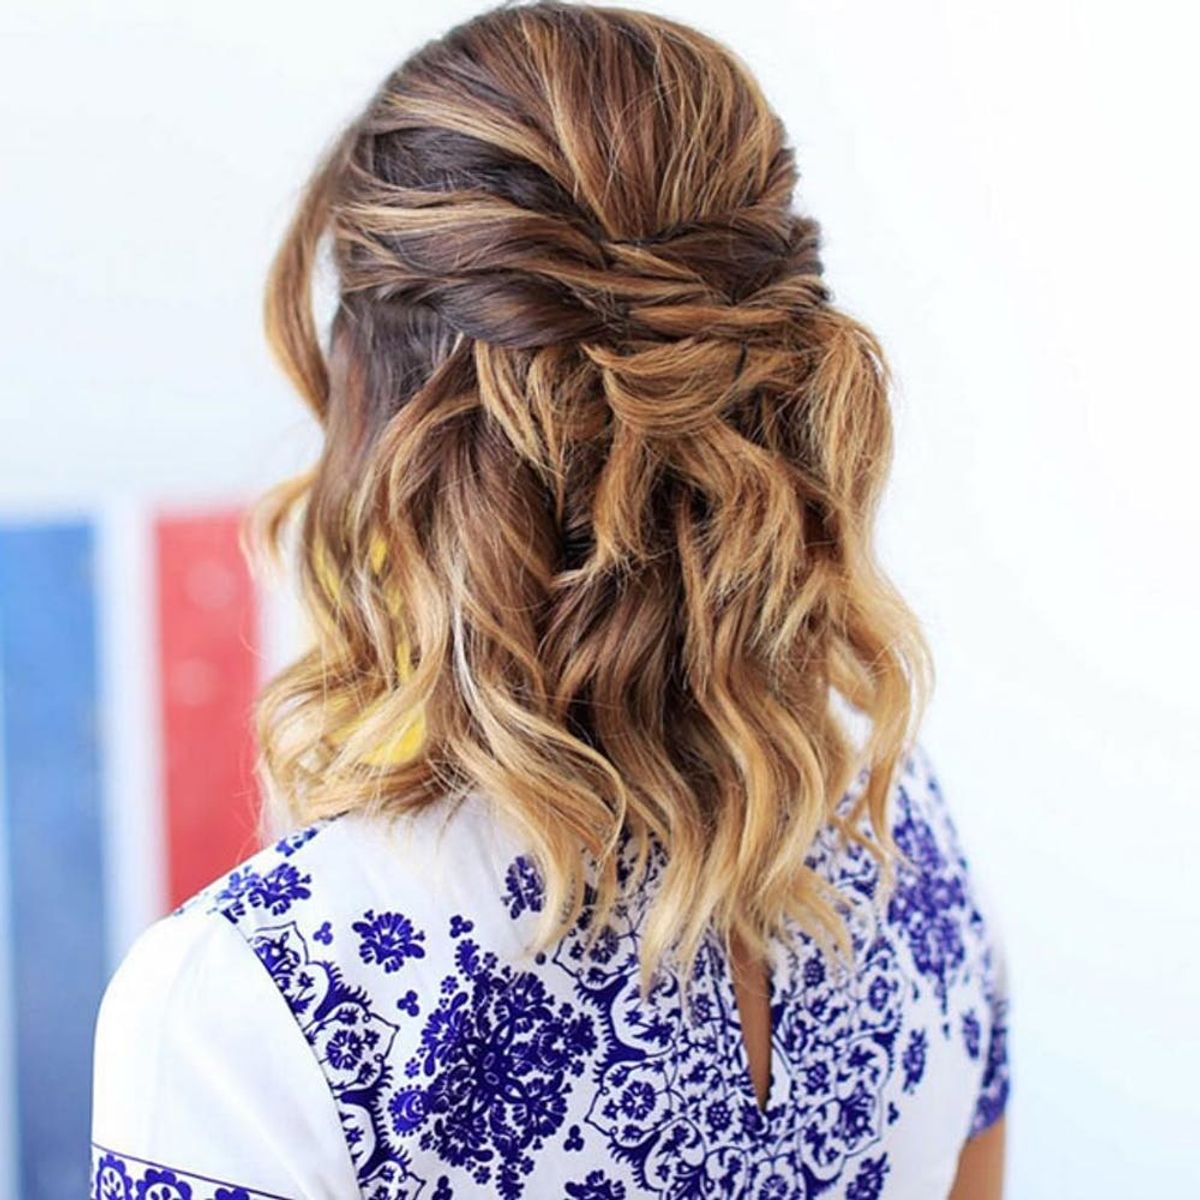 10 Mid-Length Hairstyles to Wear to All Your Summer Events